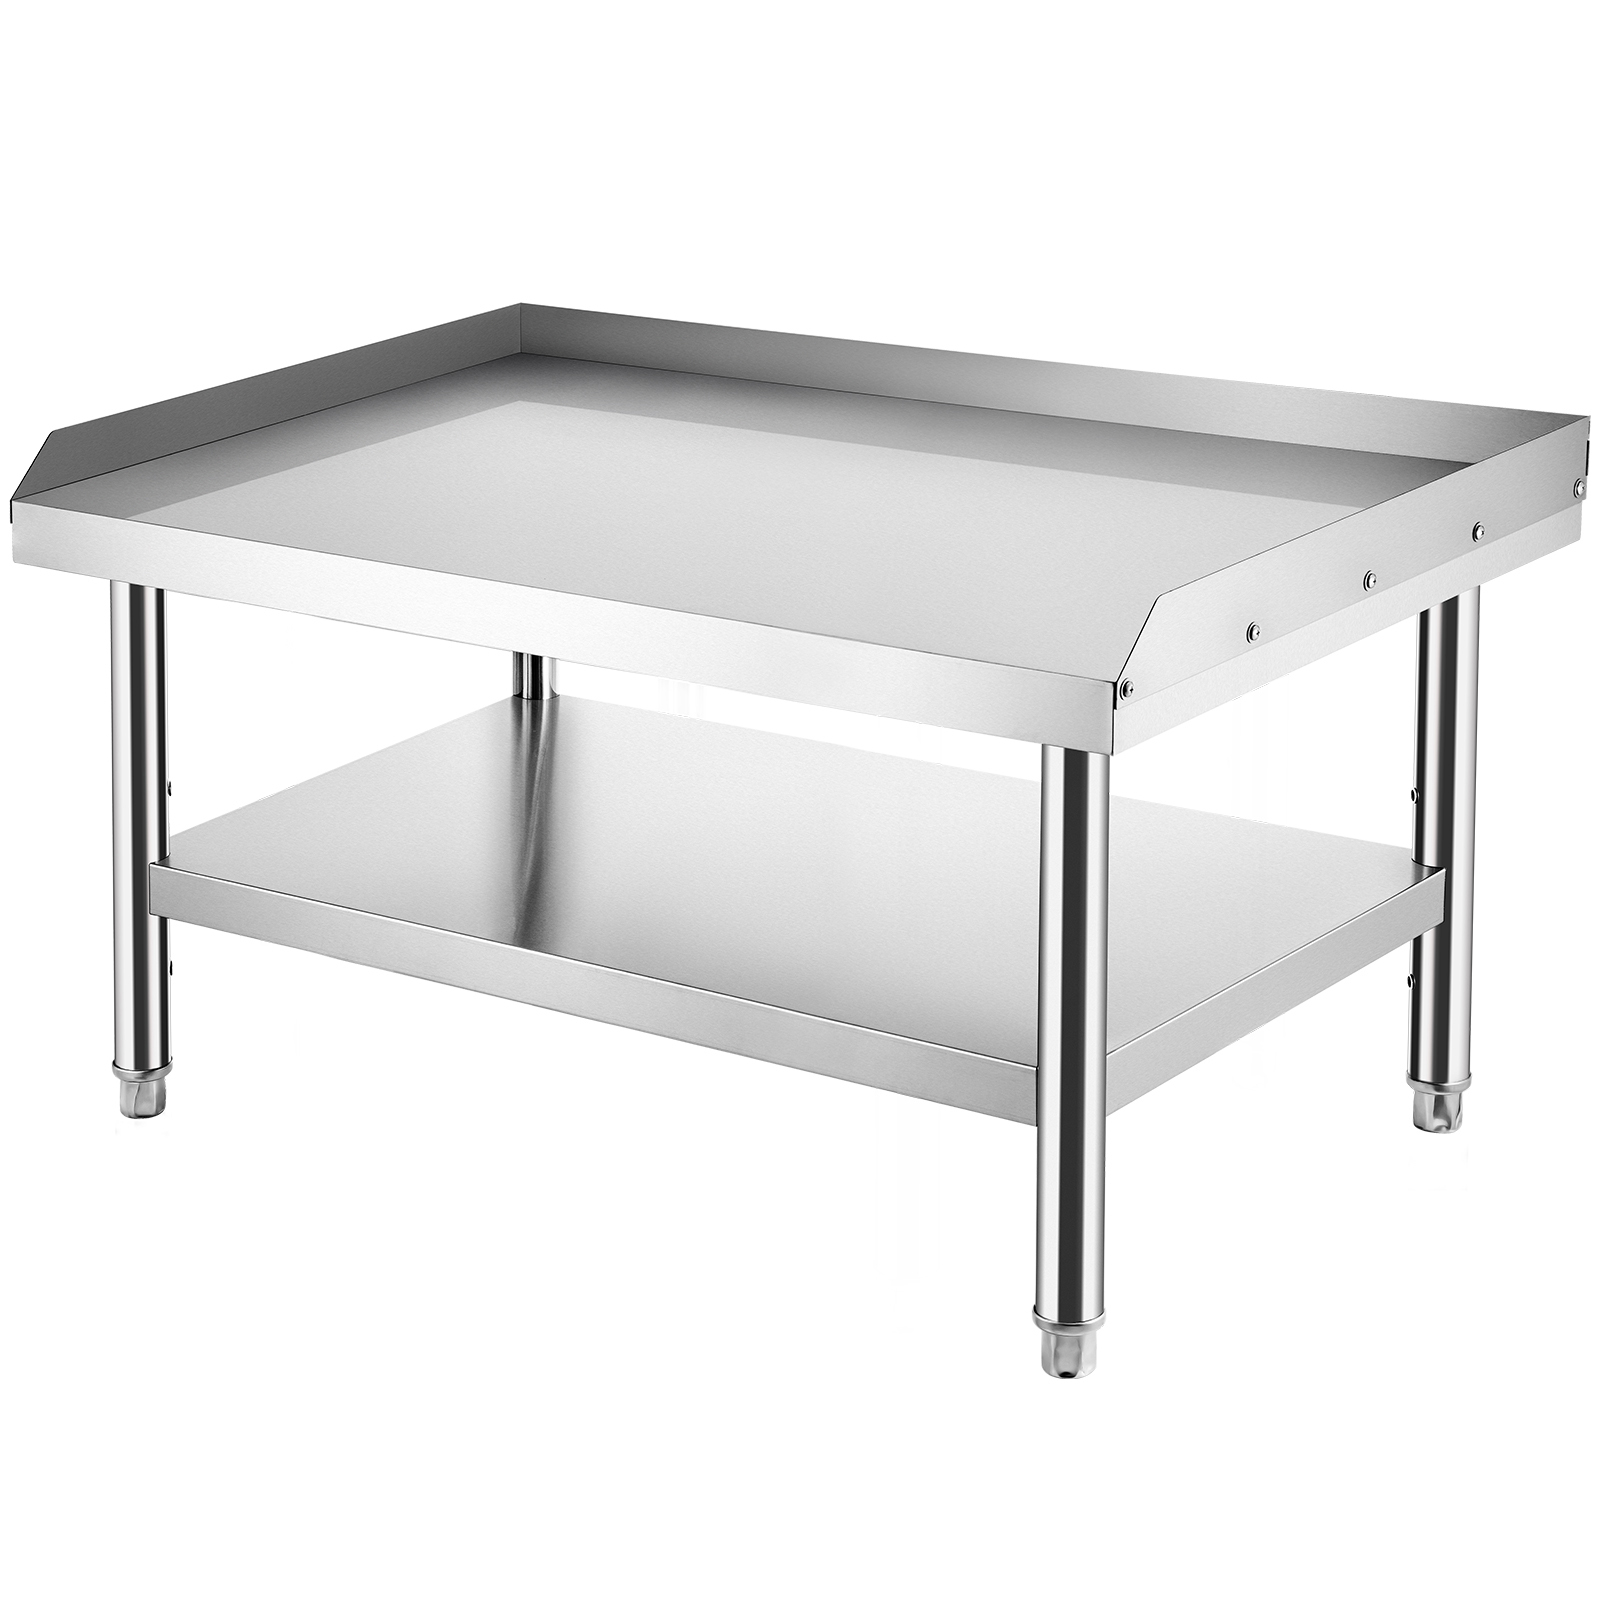 VEVOR Stainless Steel Table for Prep & Work 48" x 28" Kitchen Equipment Stand от Vevor Many GEOs